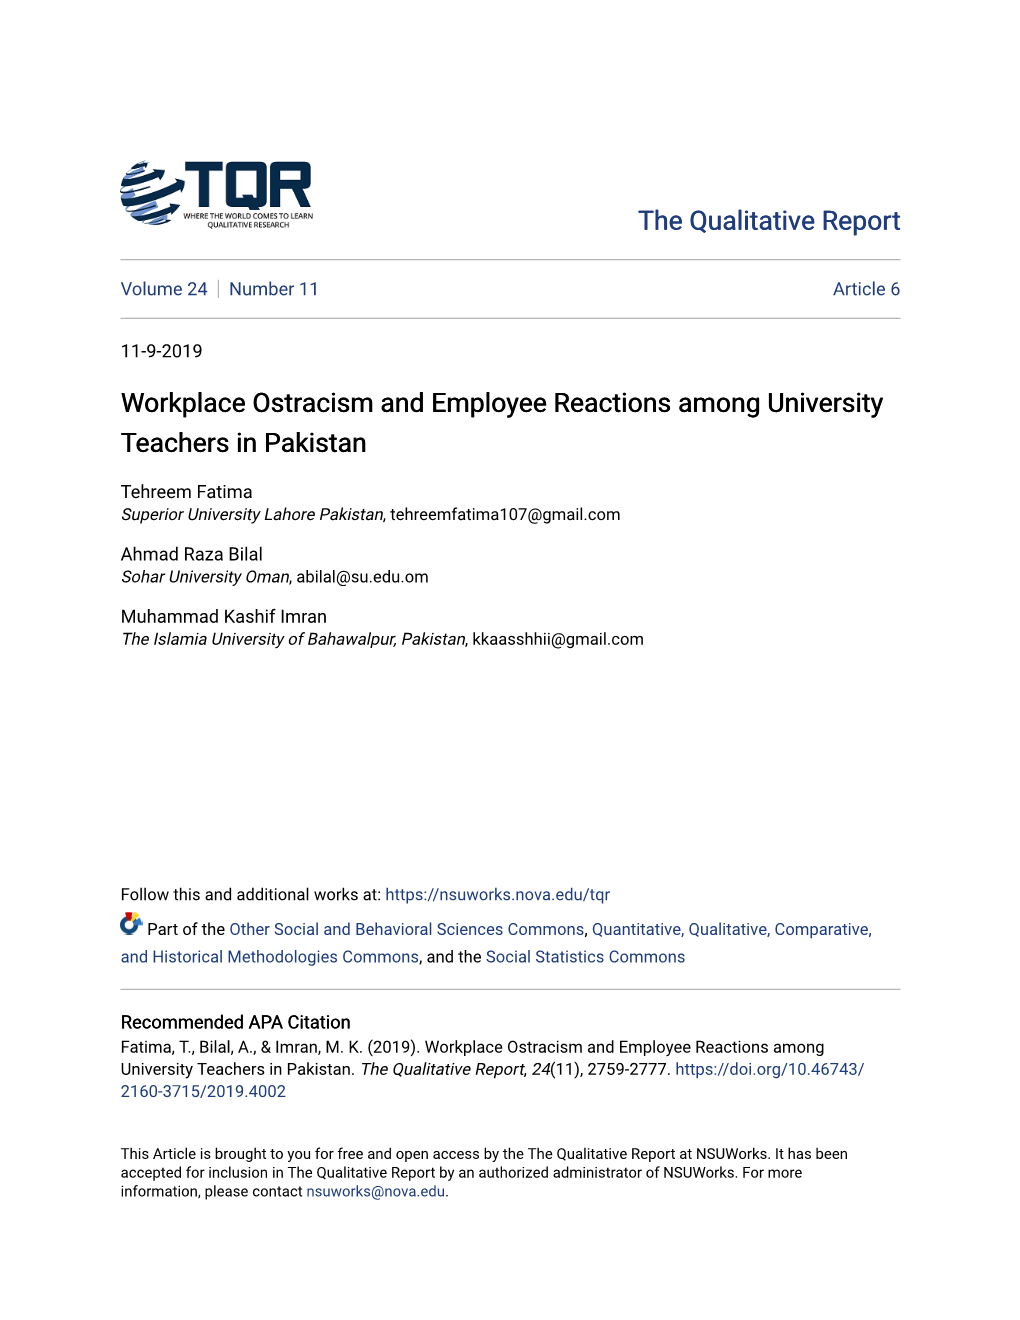 Workplace Ostracism and Employee Reactions Among University Teachers in Pakistan